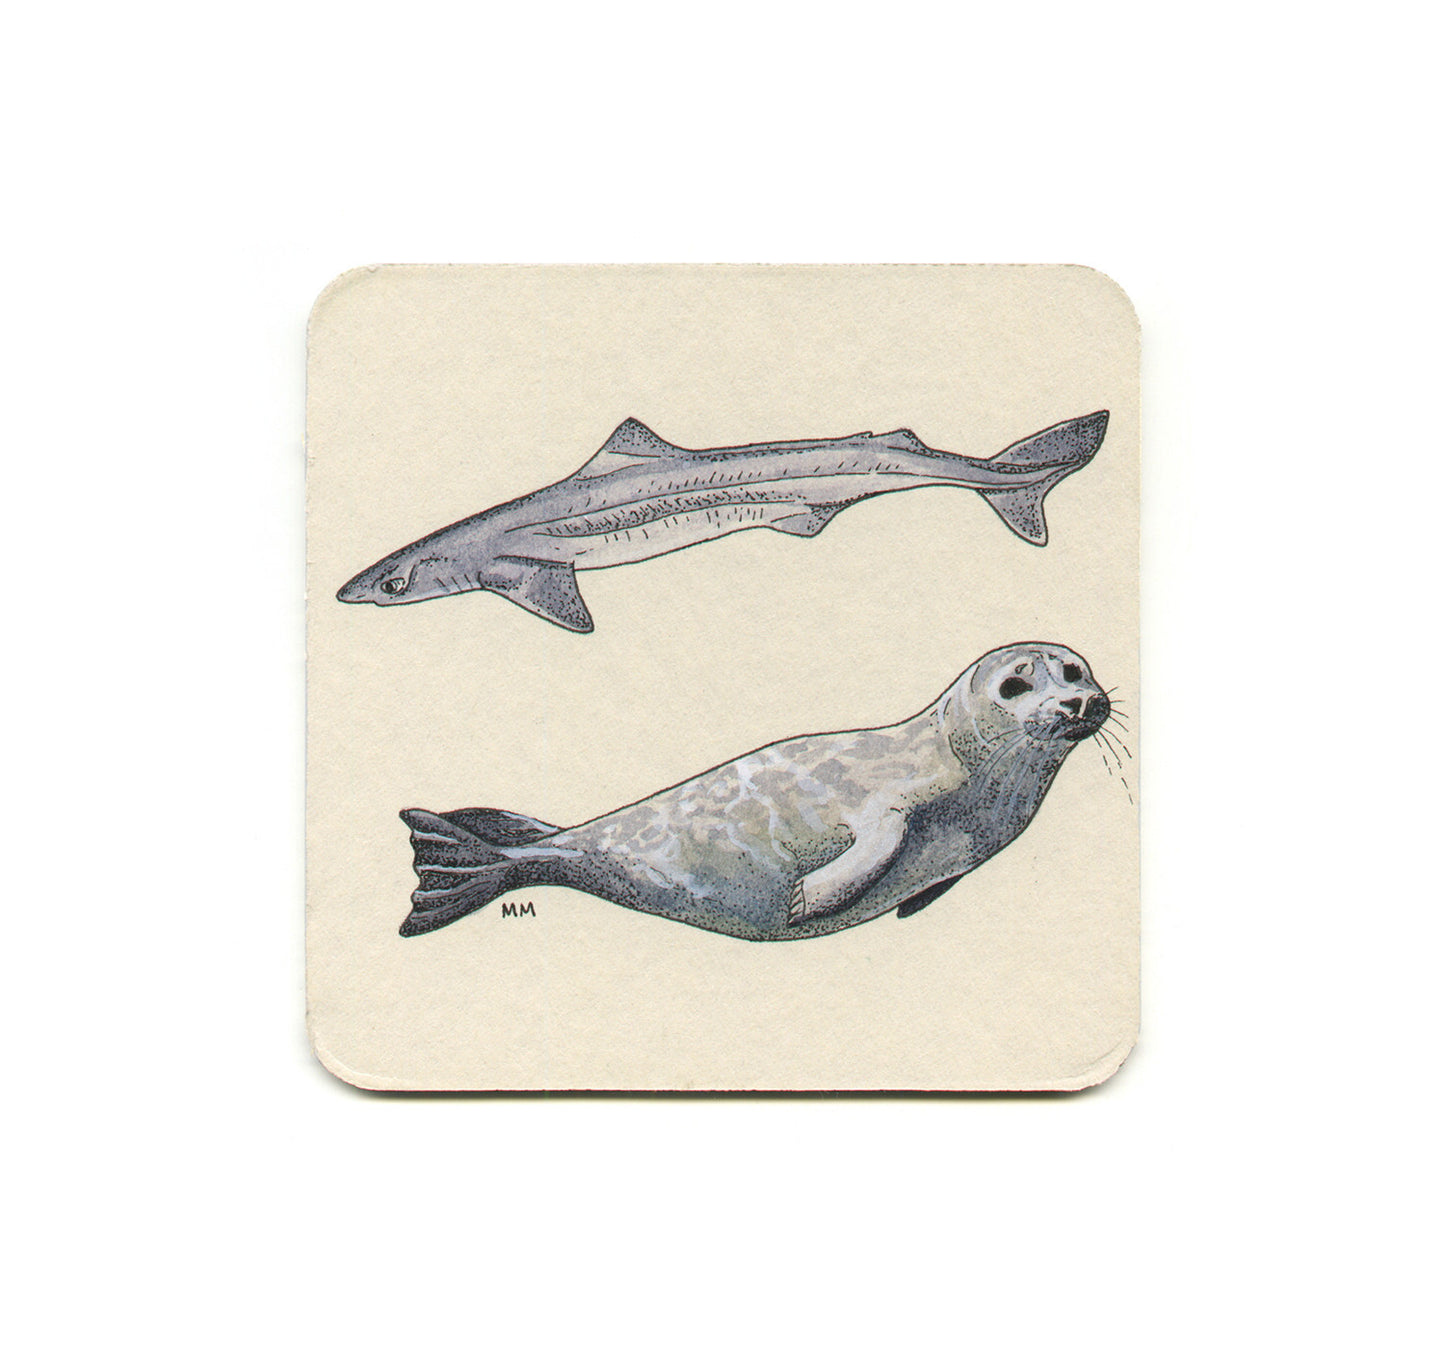 S1 Madison Erin Mayfield - Spiny Dogfish & Pacific Harbor Seal Coaster